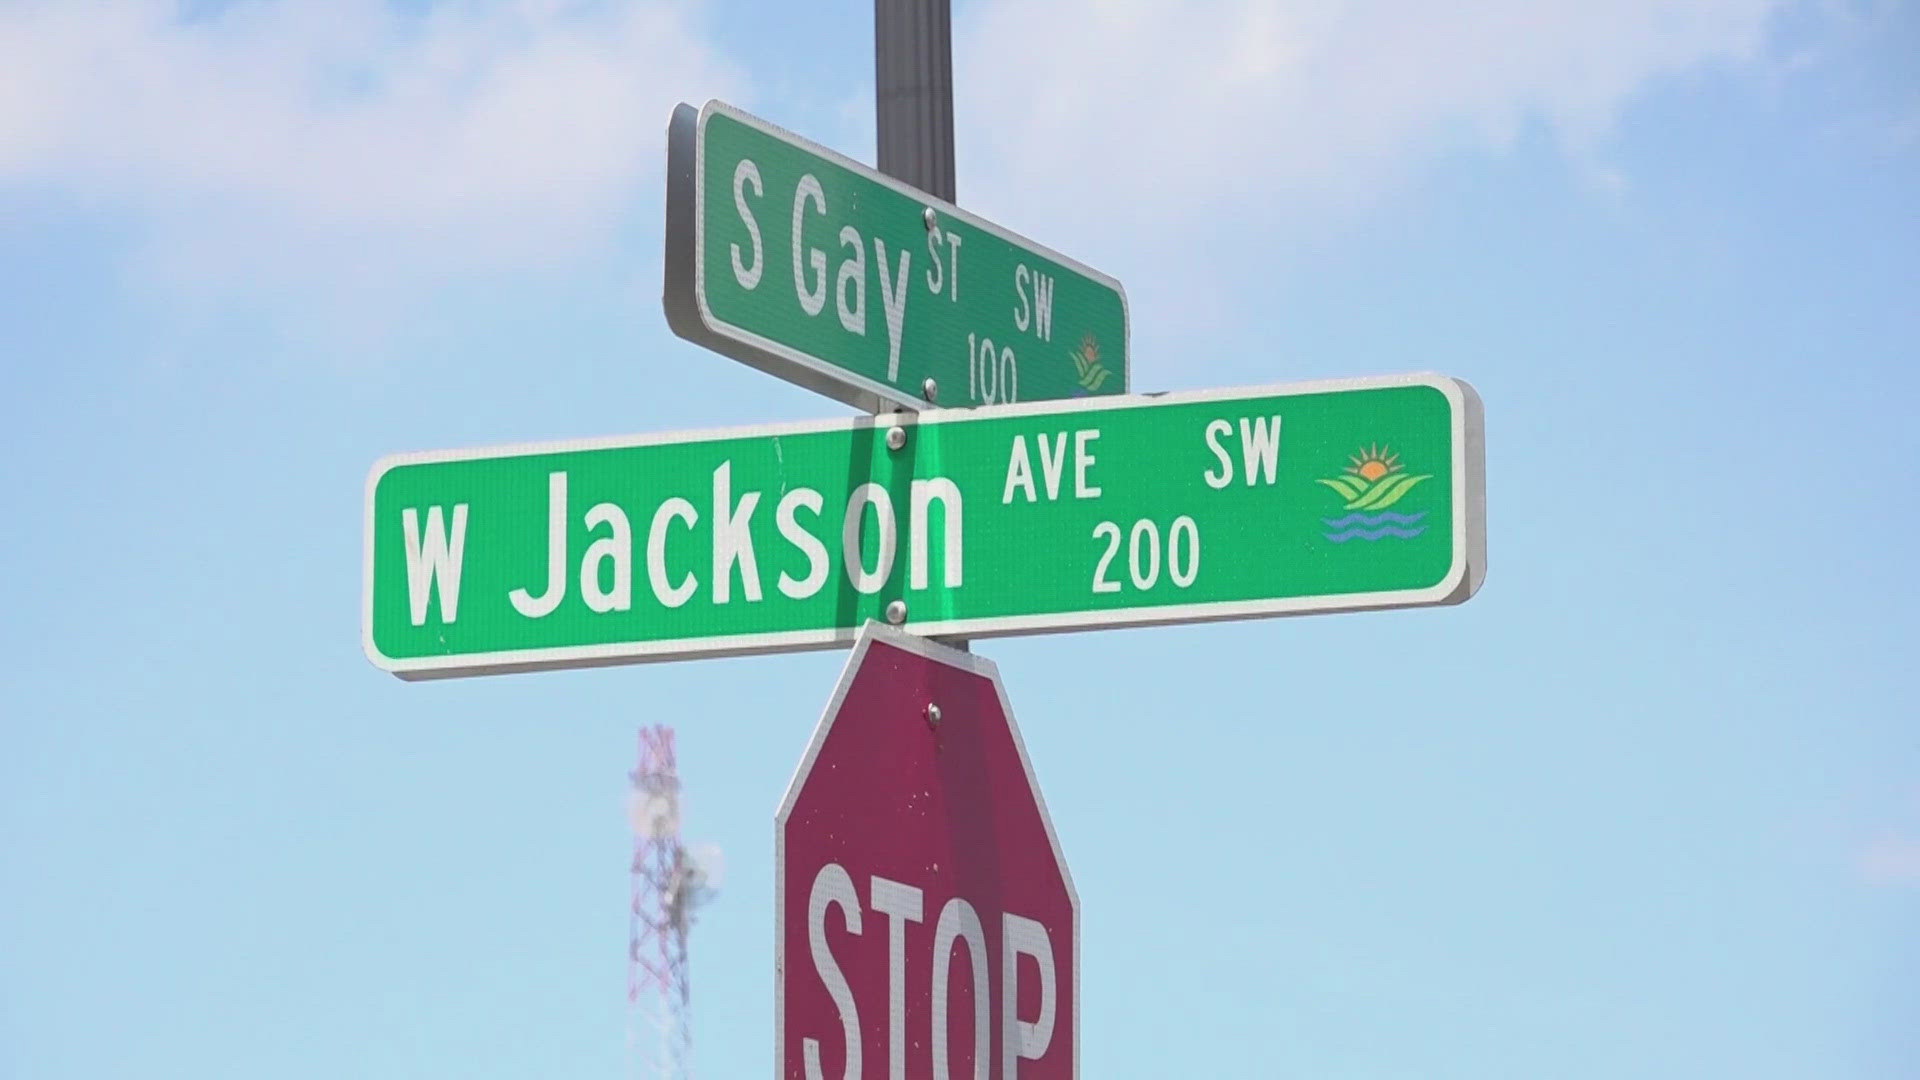 Gay Street between Jackson Avenue and Vine Avenue will only be open to pedestrians from 4 p.m. to 10 p.m. on Friday.